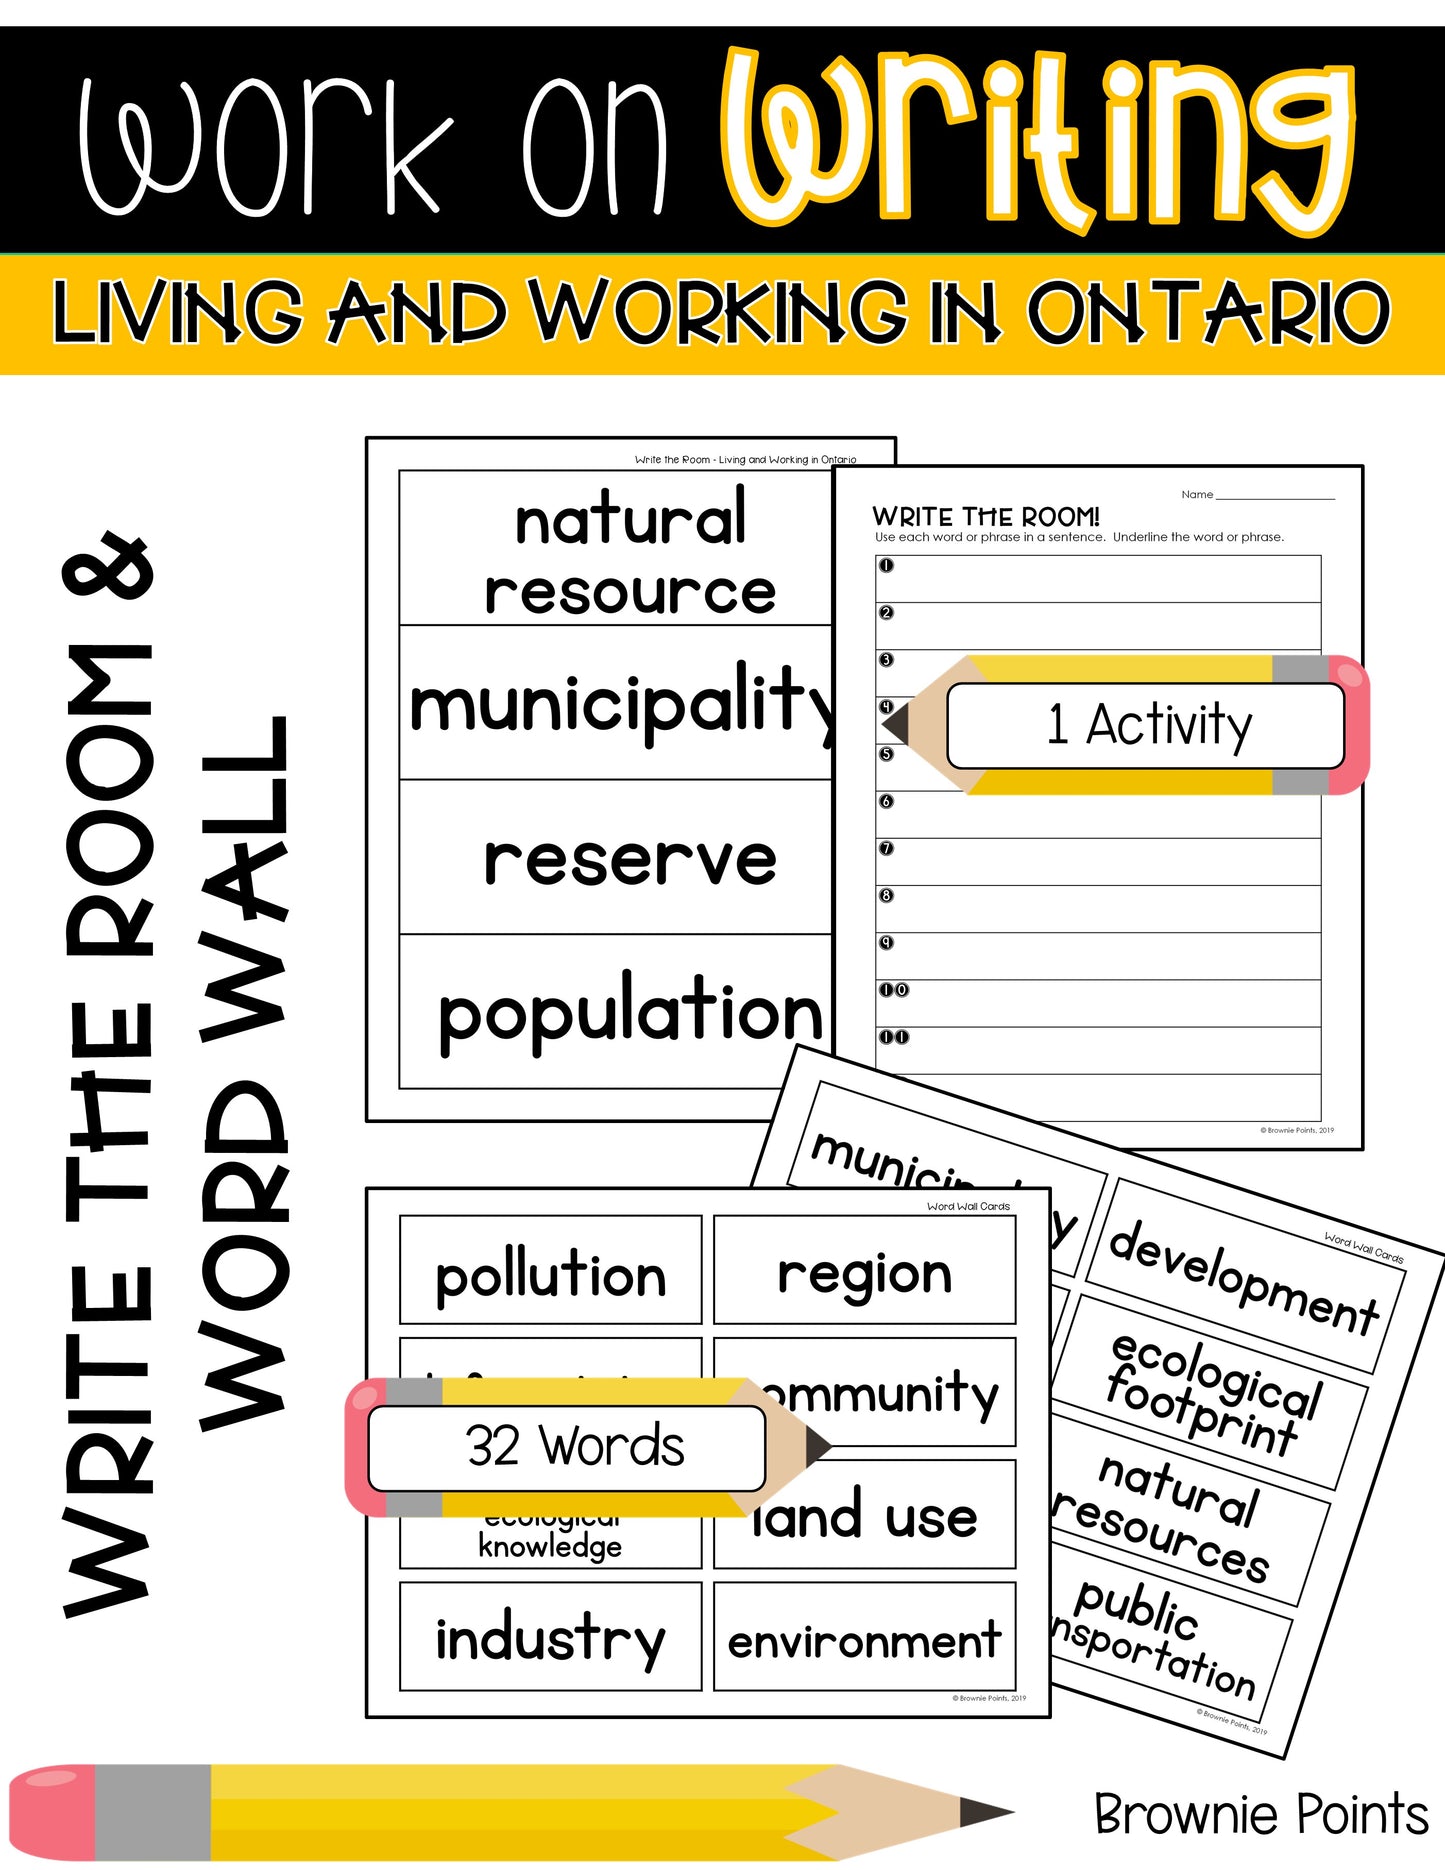 Work on Writing - Living and Working in Ontario